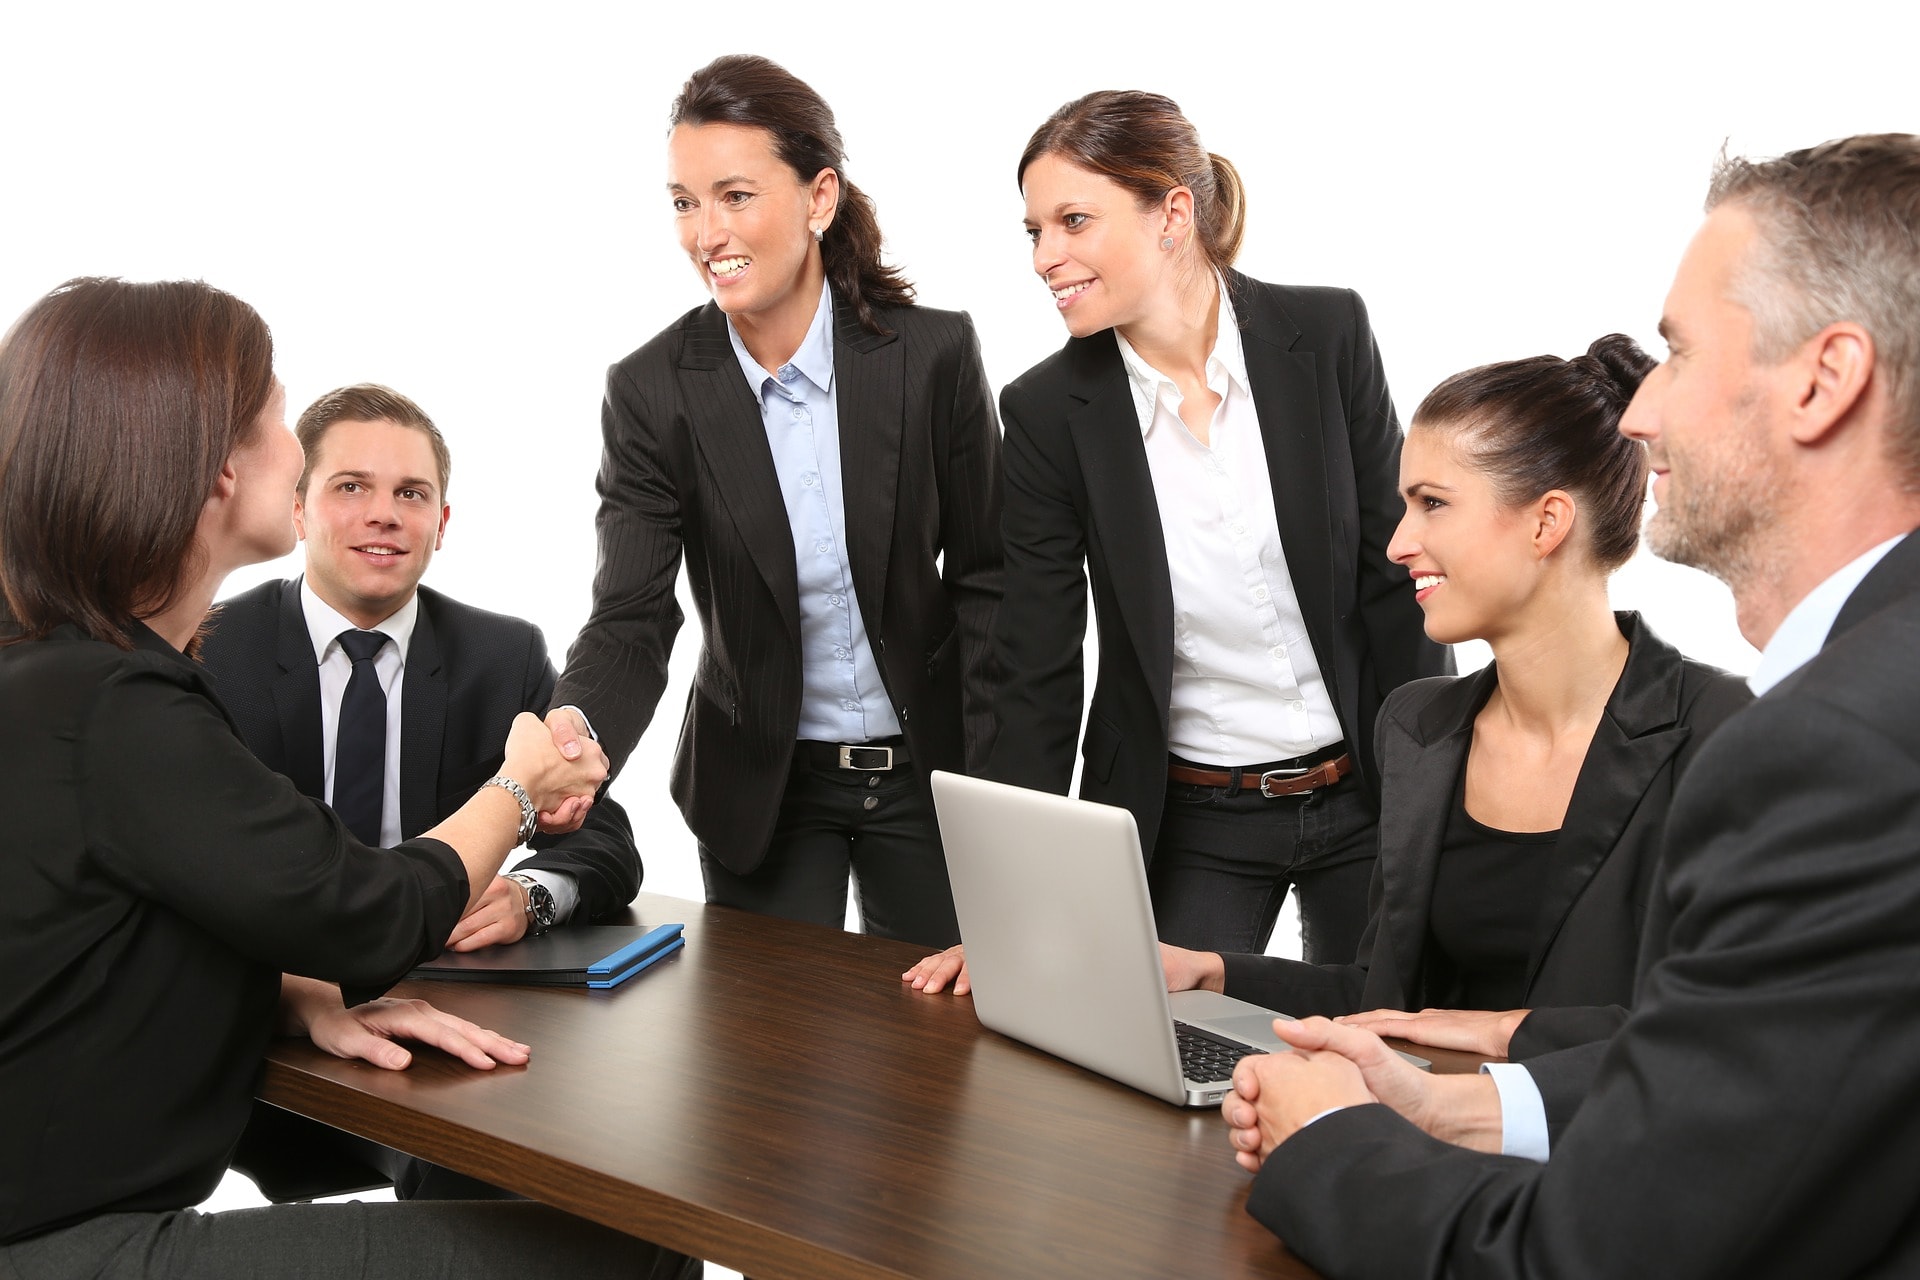 Group Interviews: Demystifying How to Behave and Get the Job